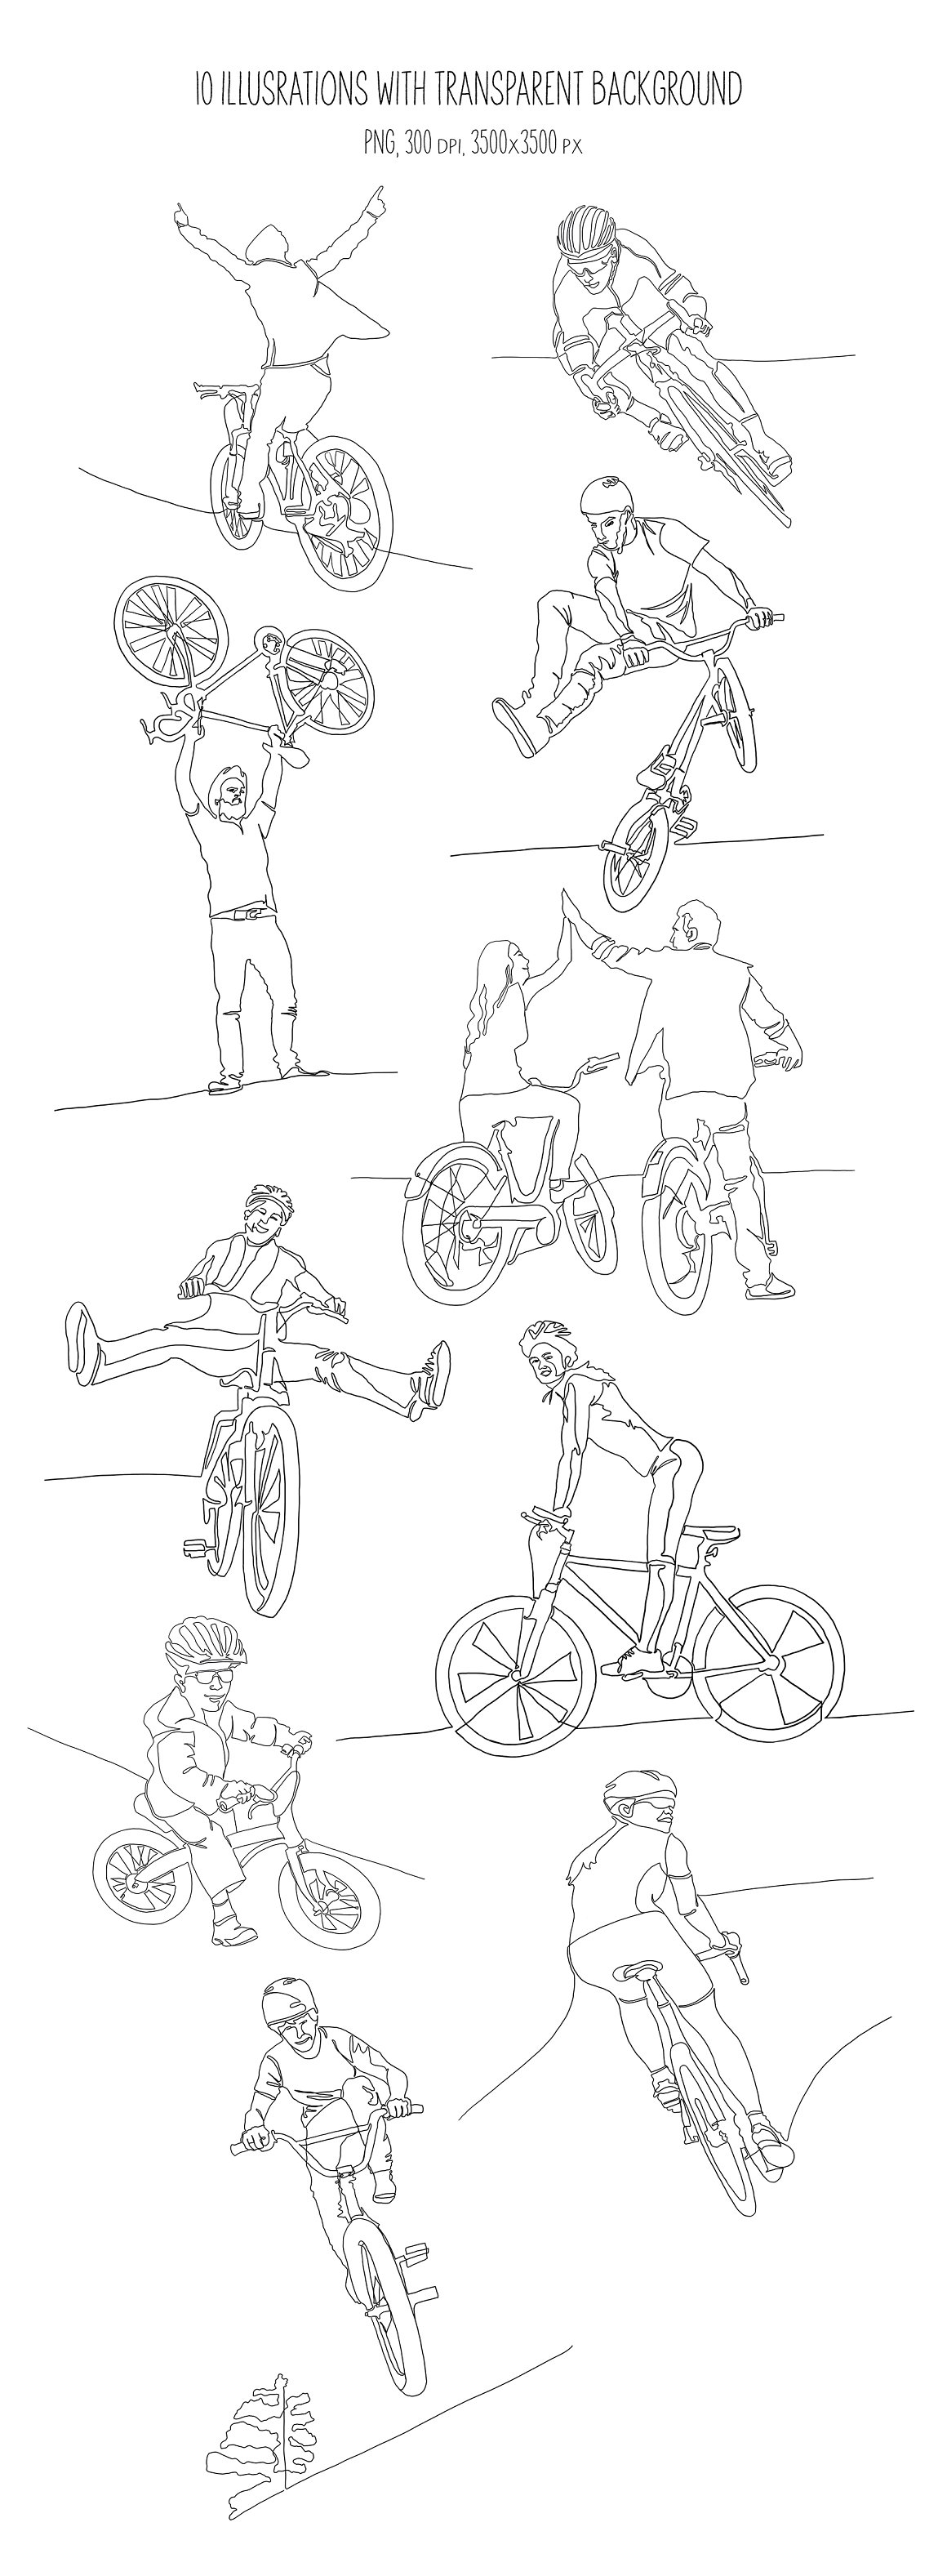 A set of 10 different line art illustrations of cycling with transparent background on a white background.